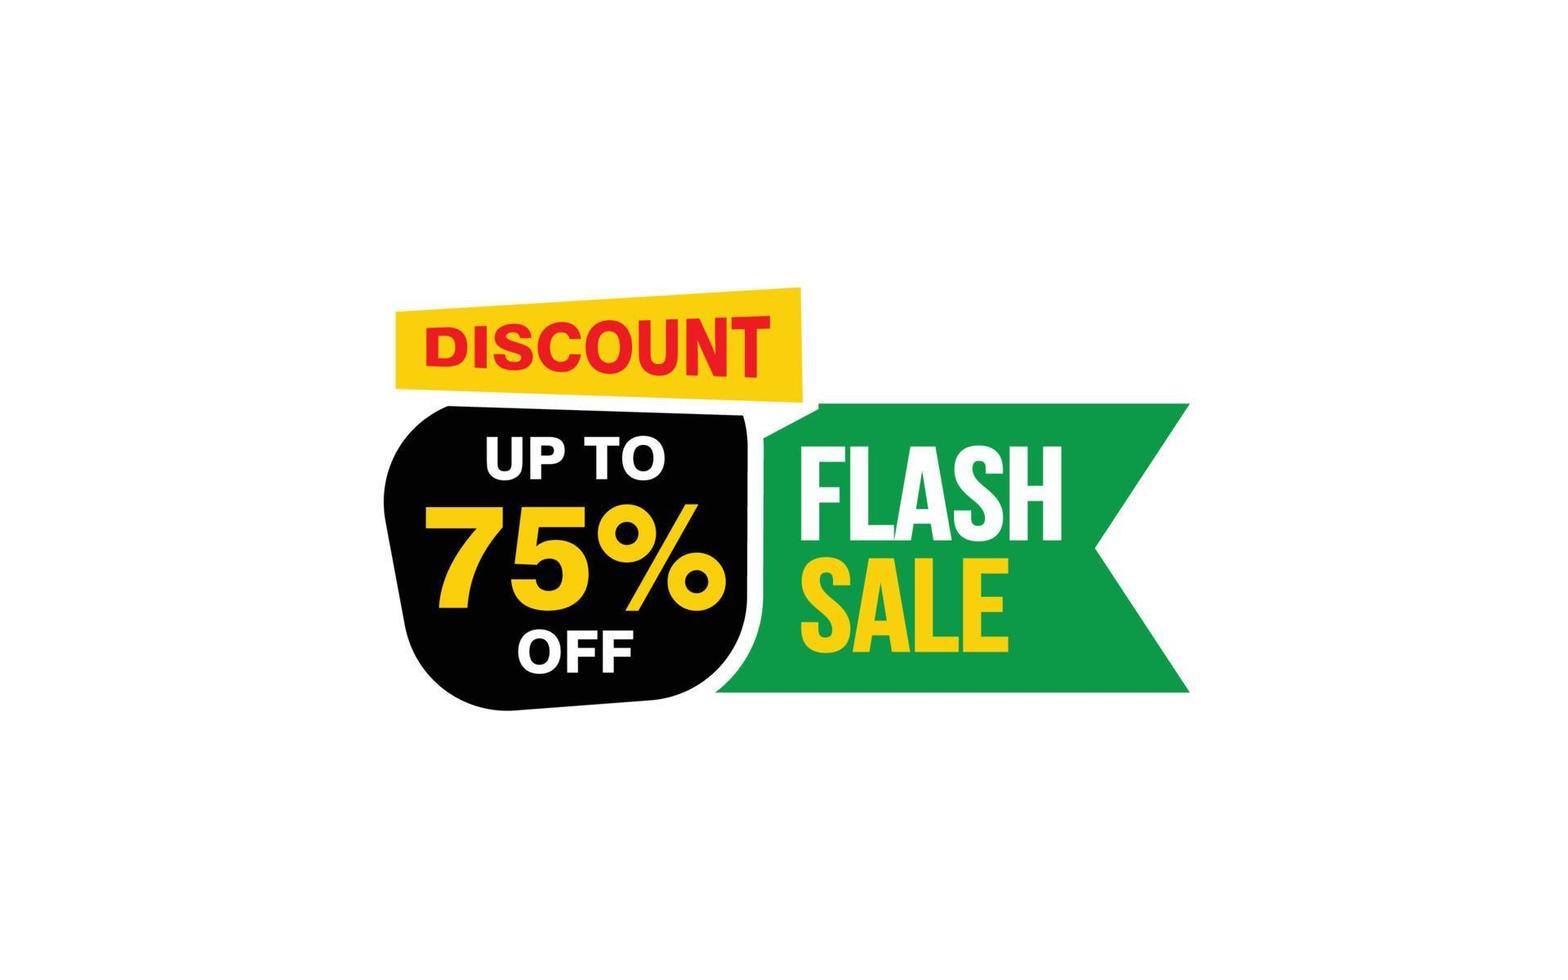 75 Percent FLASH SALE offer, clearance, promotion banner layout with sticker style. vector